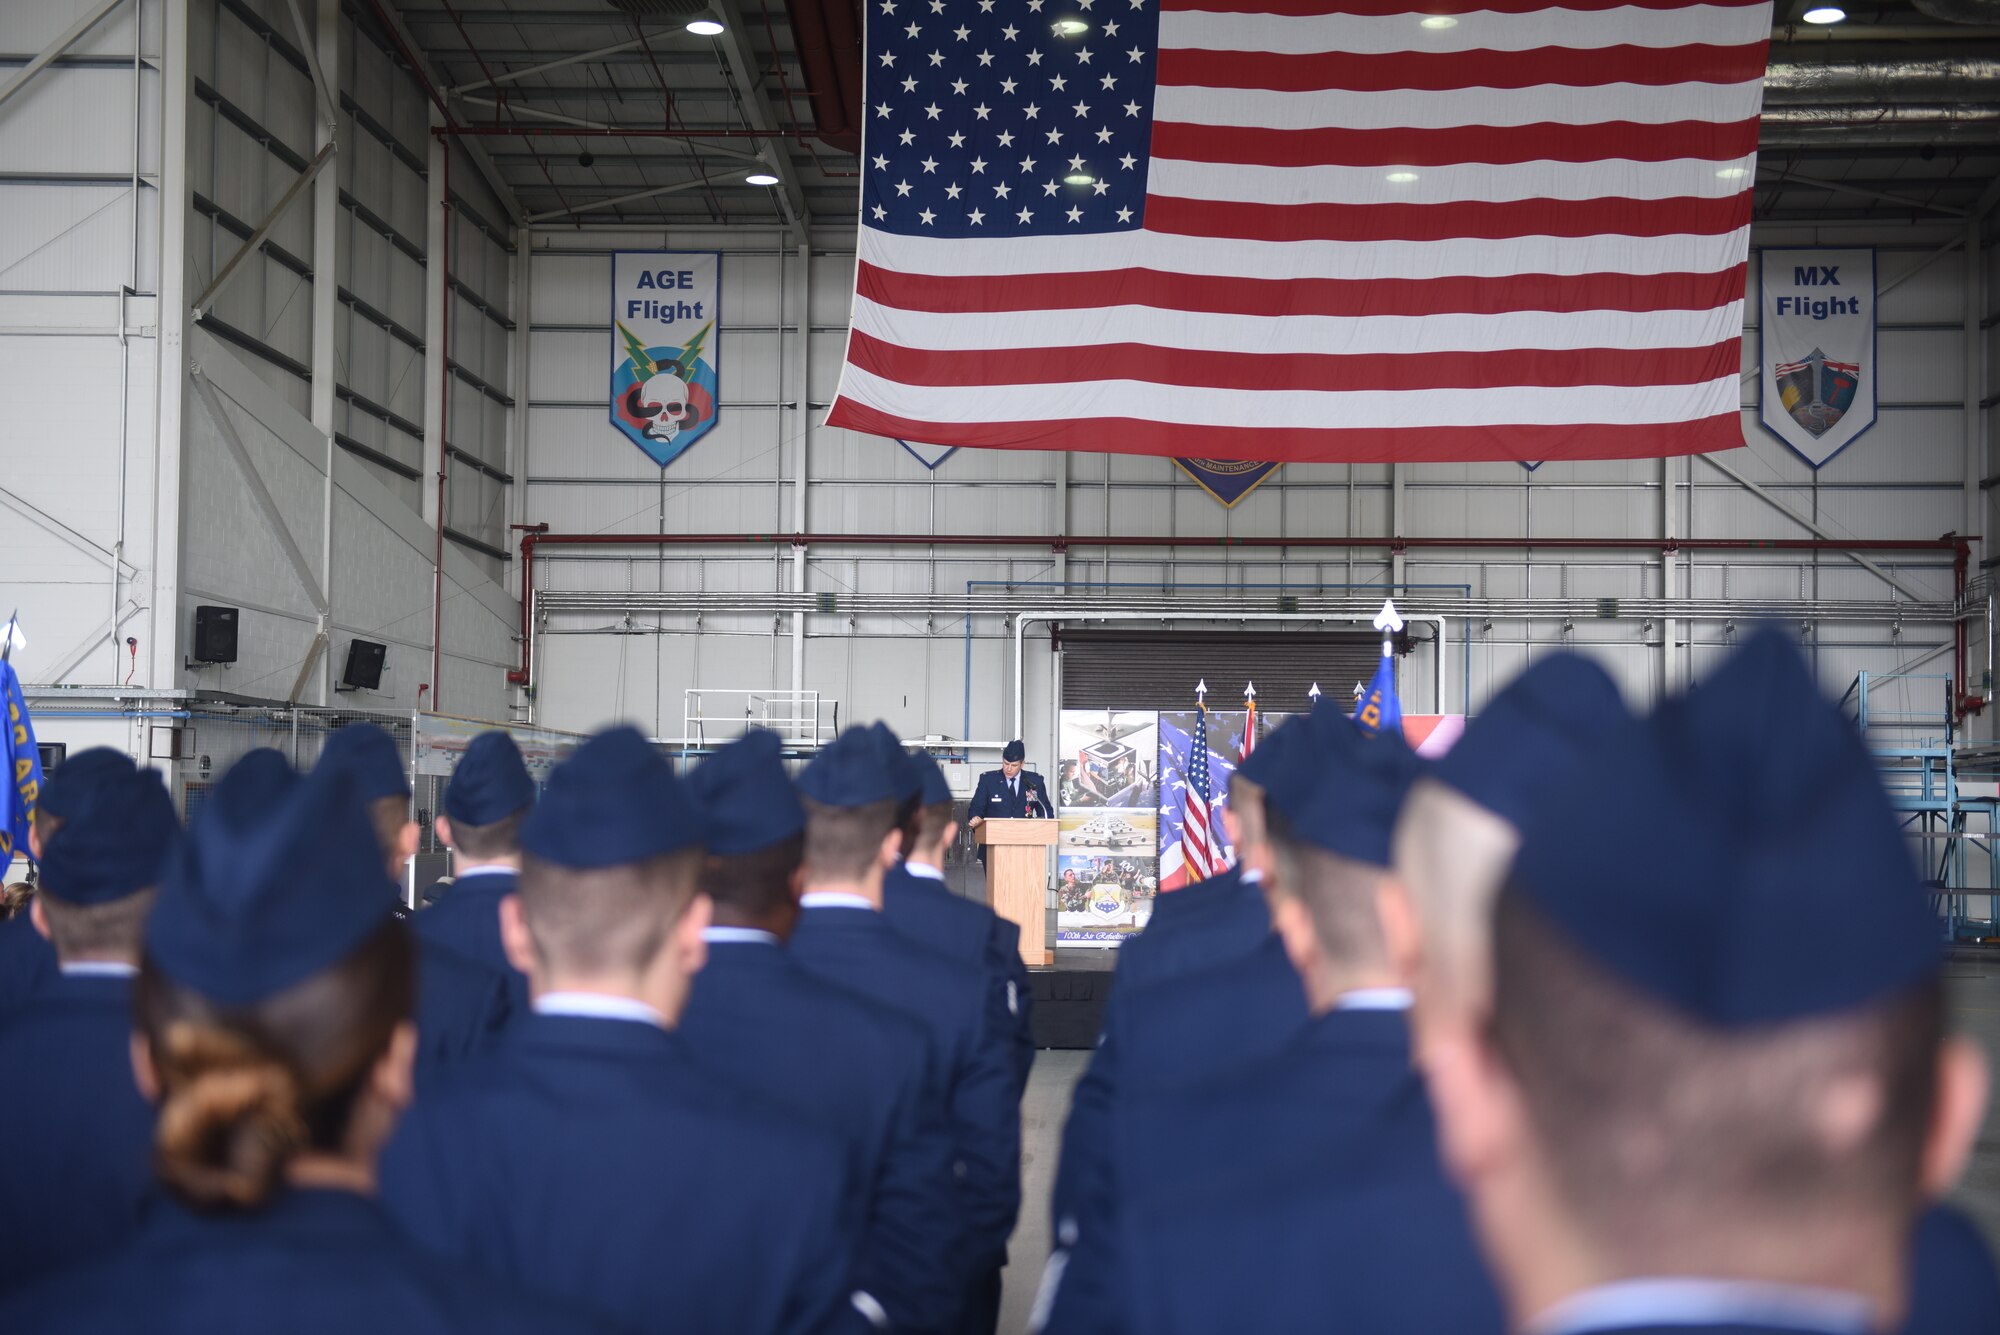 U.S. Air Force Col. Christopher Amrhein, outgoing 100th Air Refueling Wing commander, addresses the crowd at RAF Mildenhall, England, May 31, 2019. Amrhein served as the wing commander for two years. (U.S. Air Force photo by Airman 1st Class Joseph Barron)